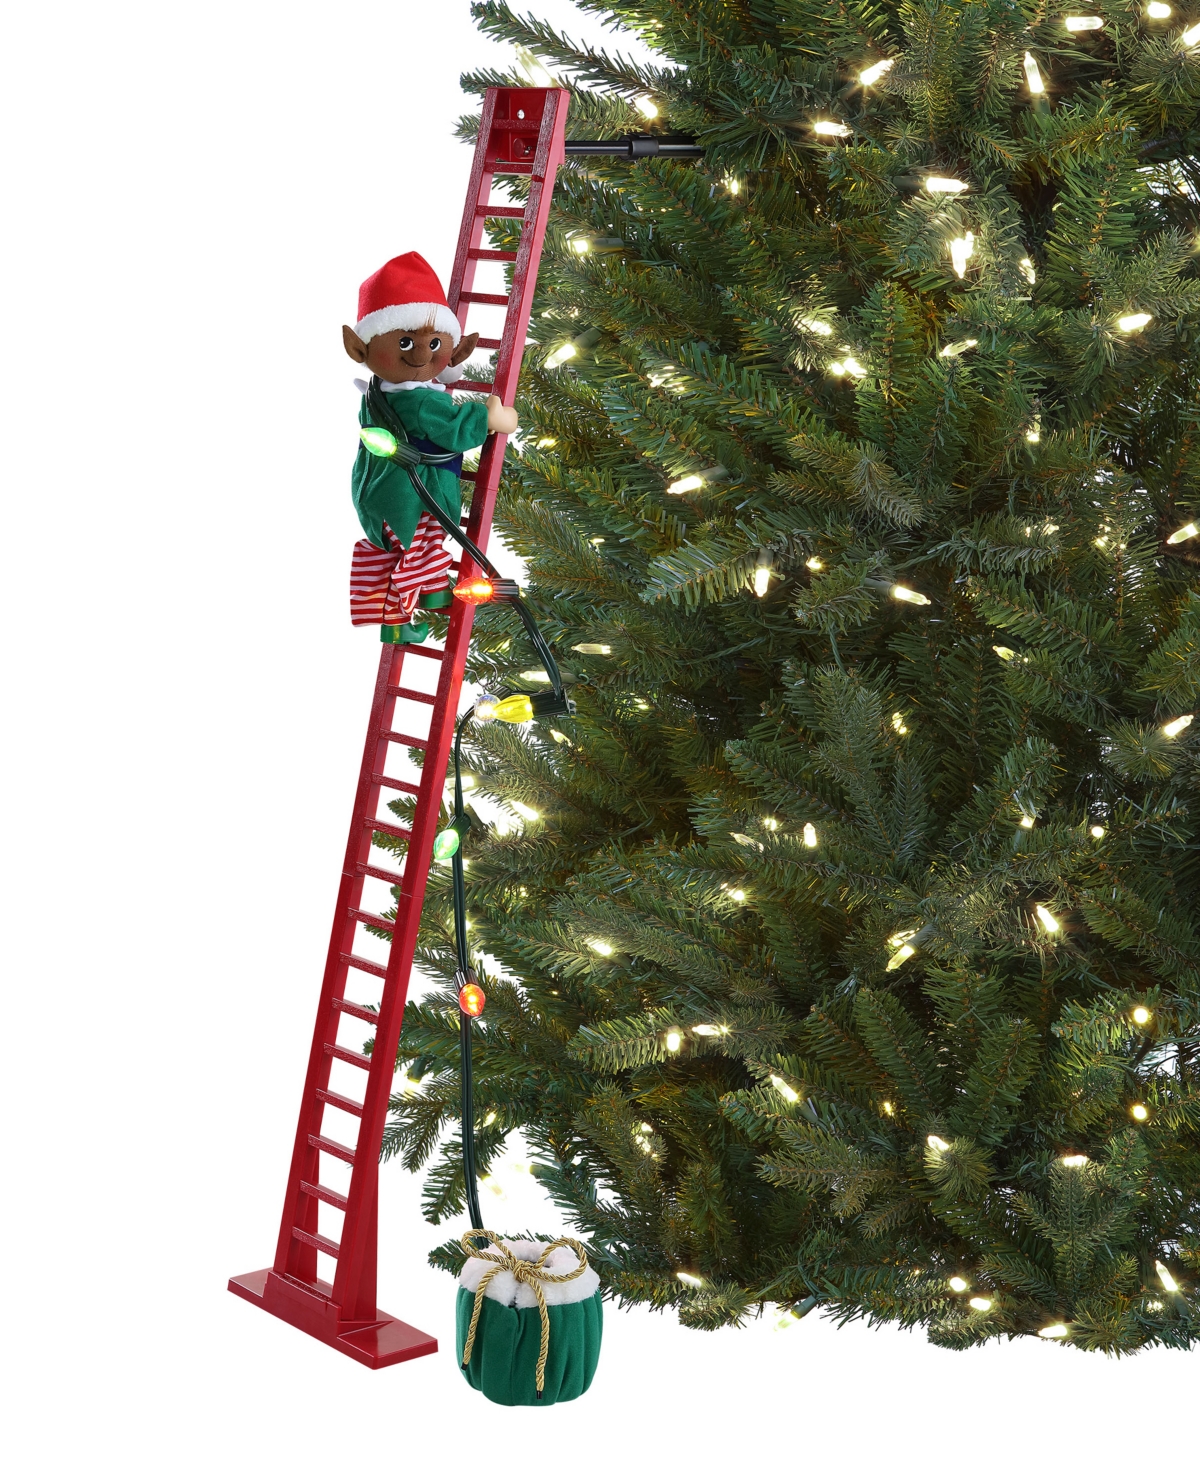 Mr. Christmas 43" Animated Super Climbing Black Elf In Red